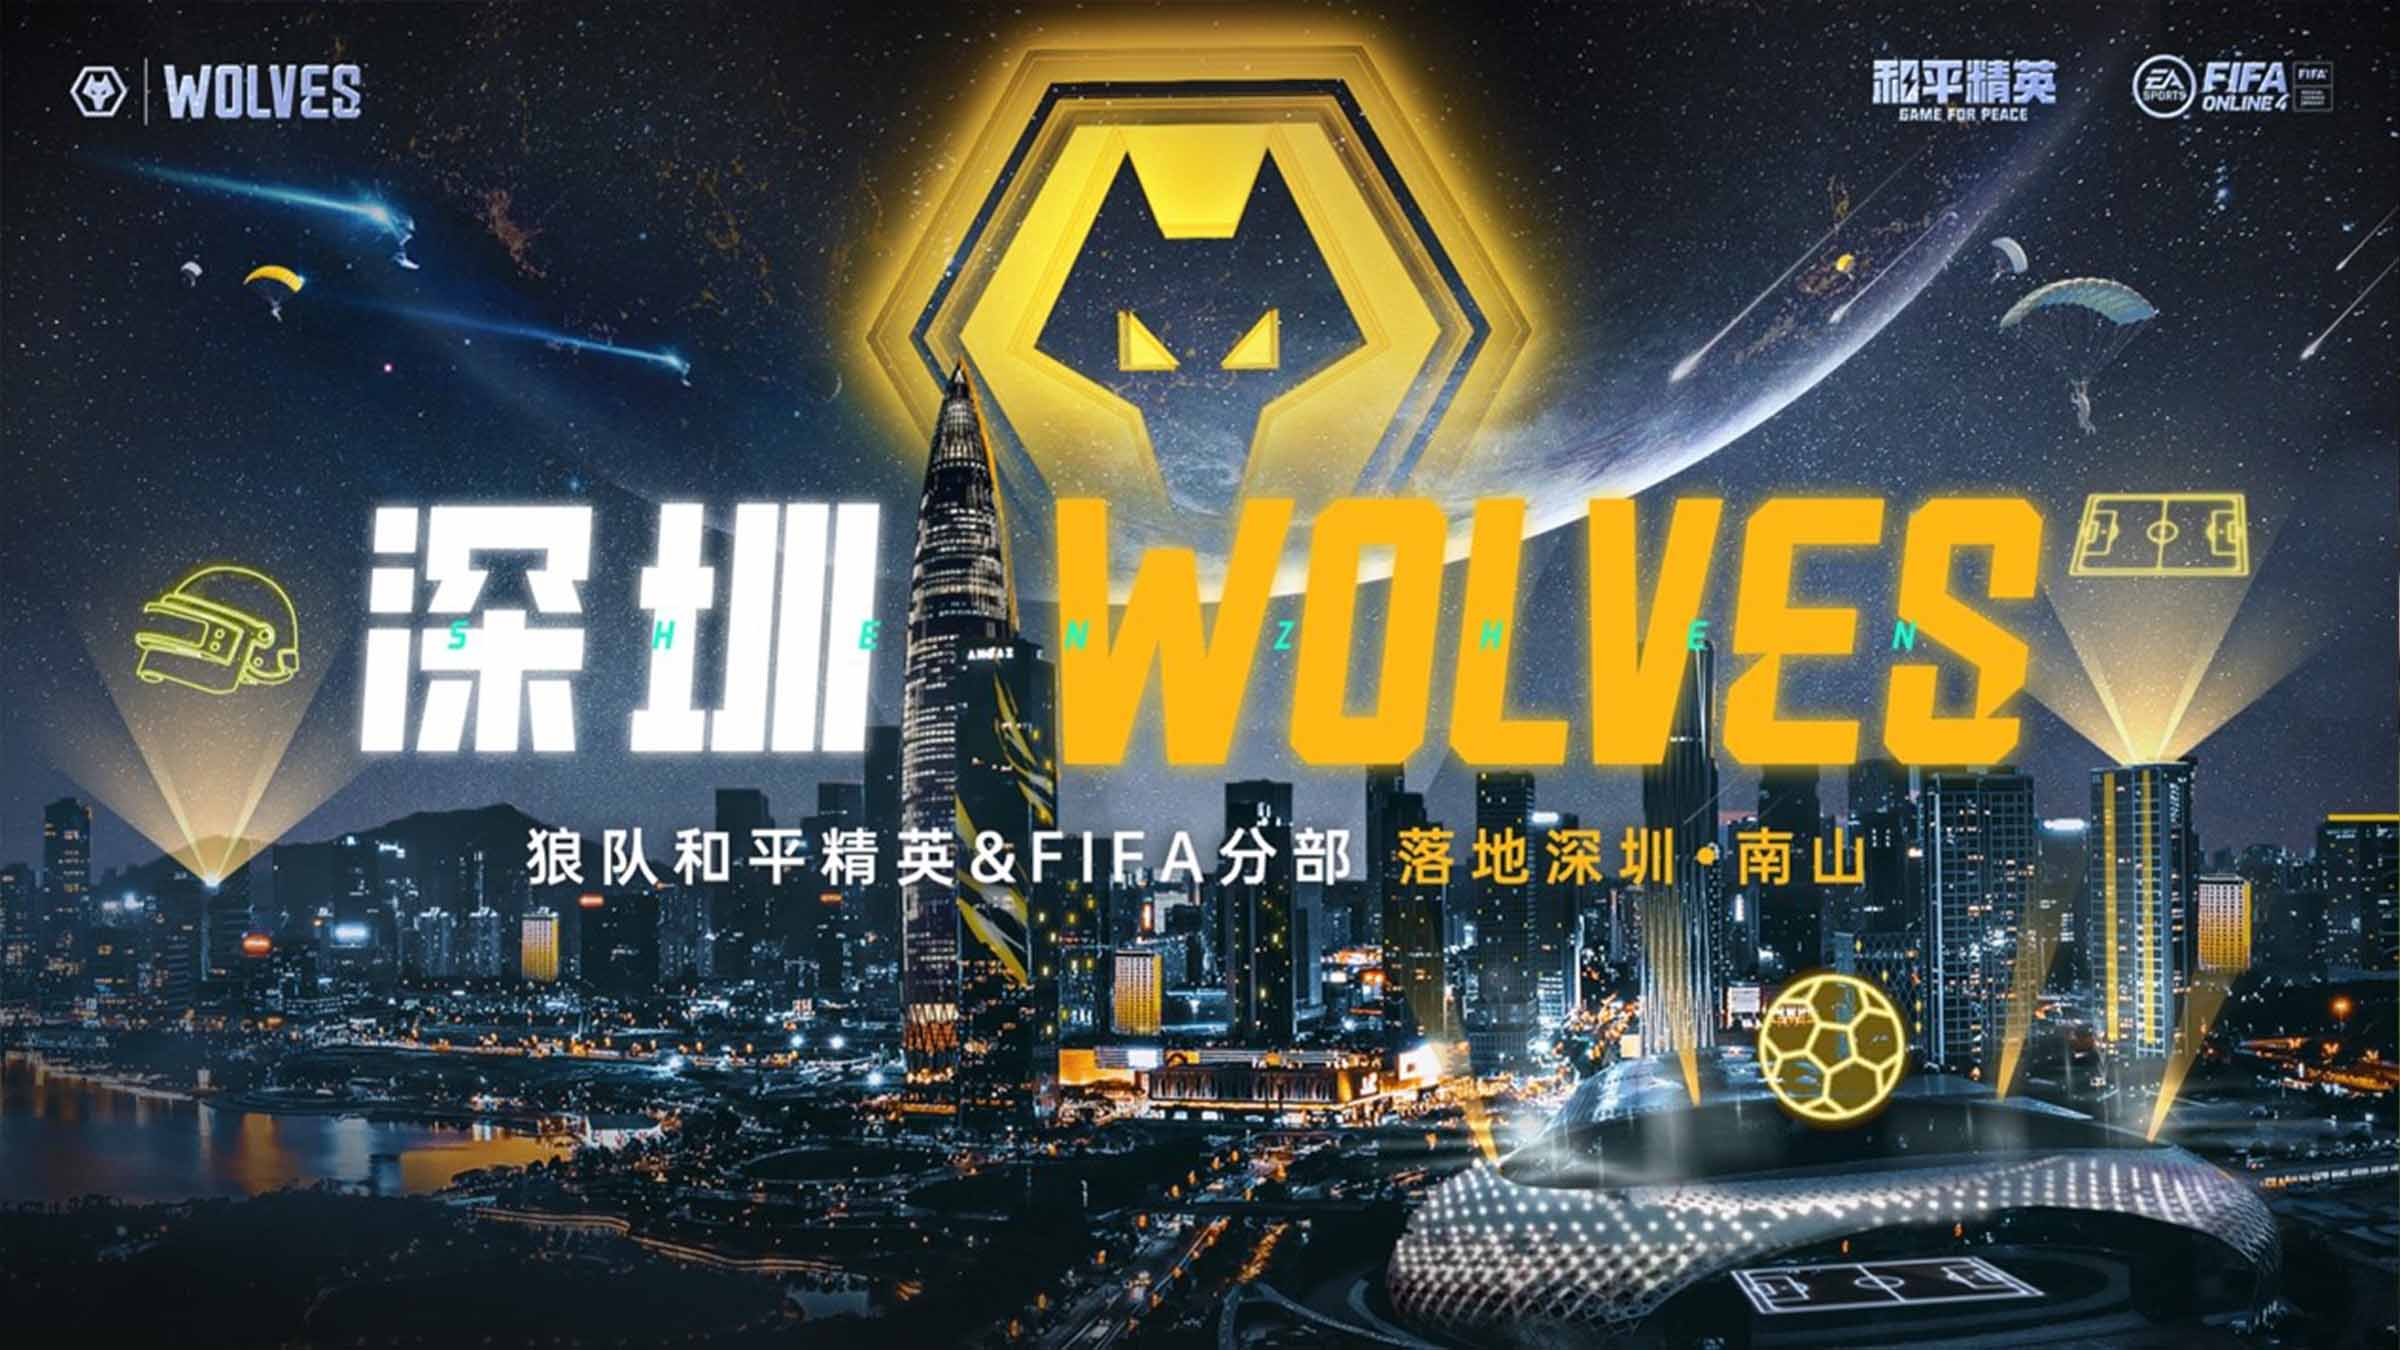 Two Wolves Esports teams to compete as Shenzhen Wolves